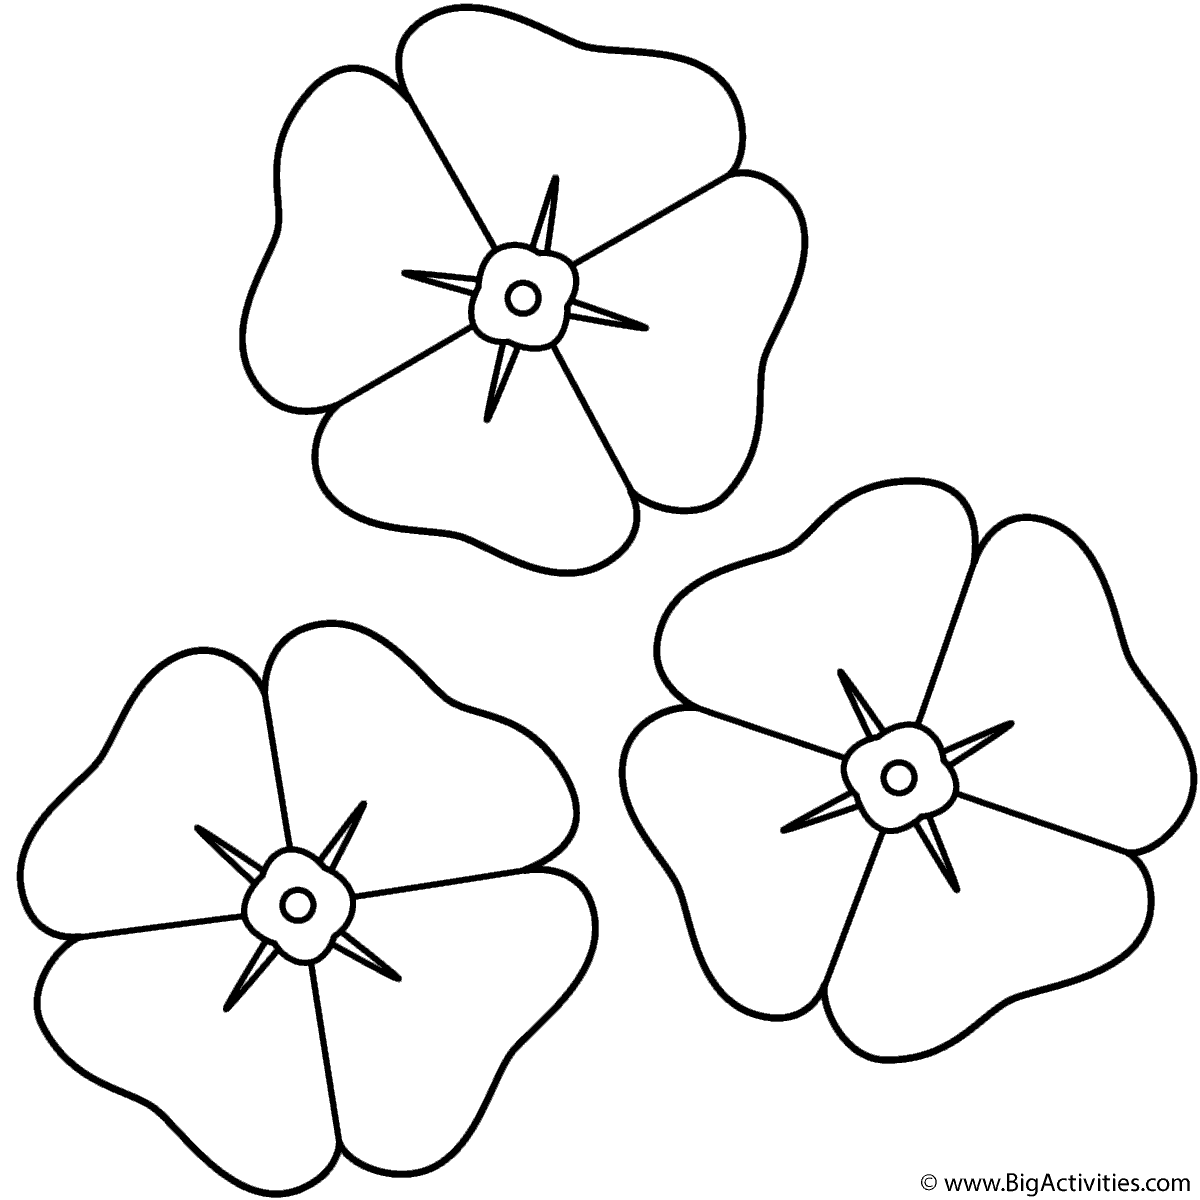 poppy-coloring-page-free-printable-coloring-pages